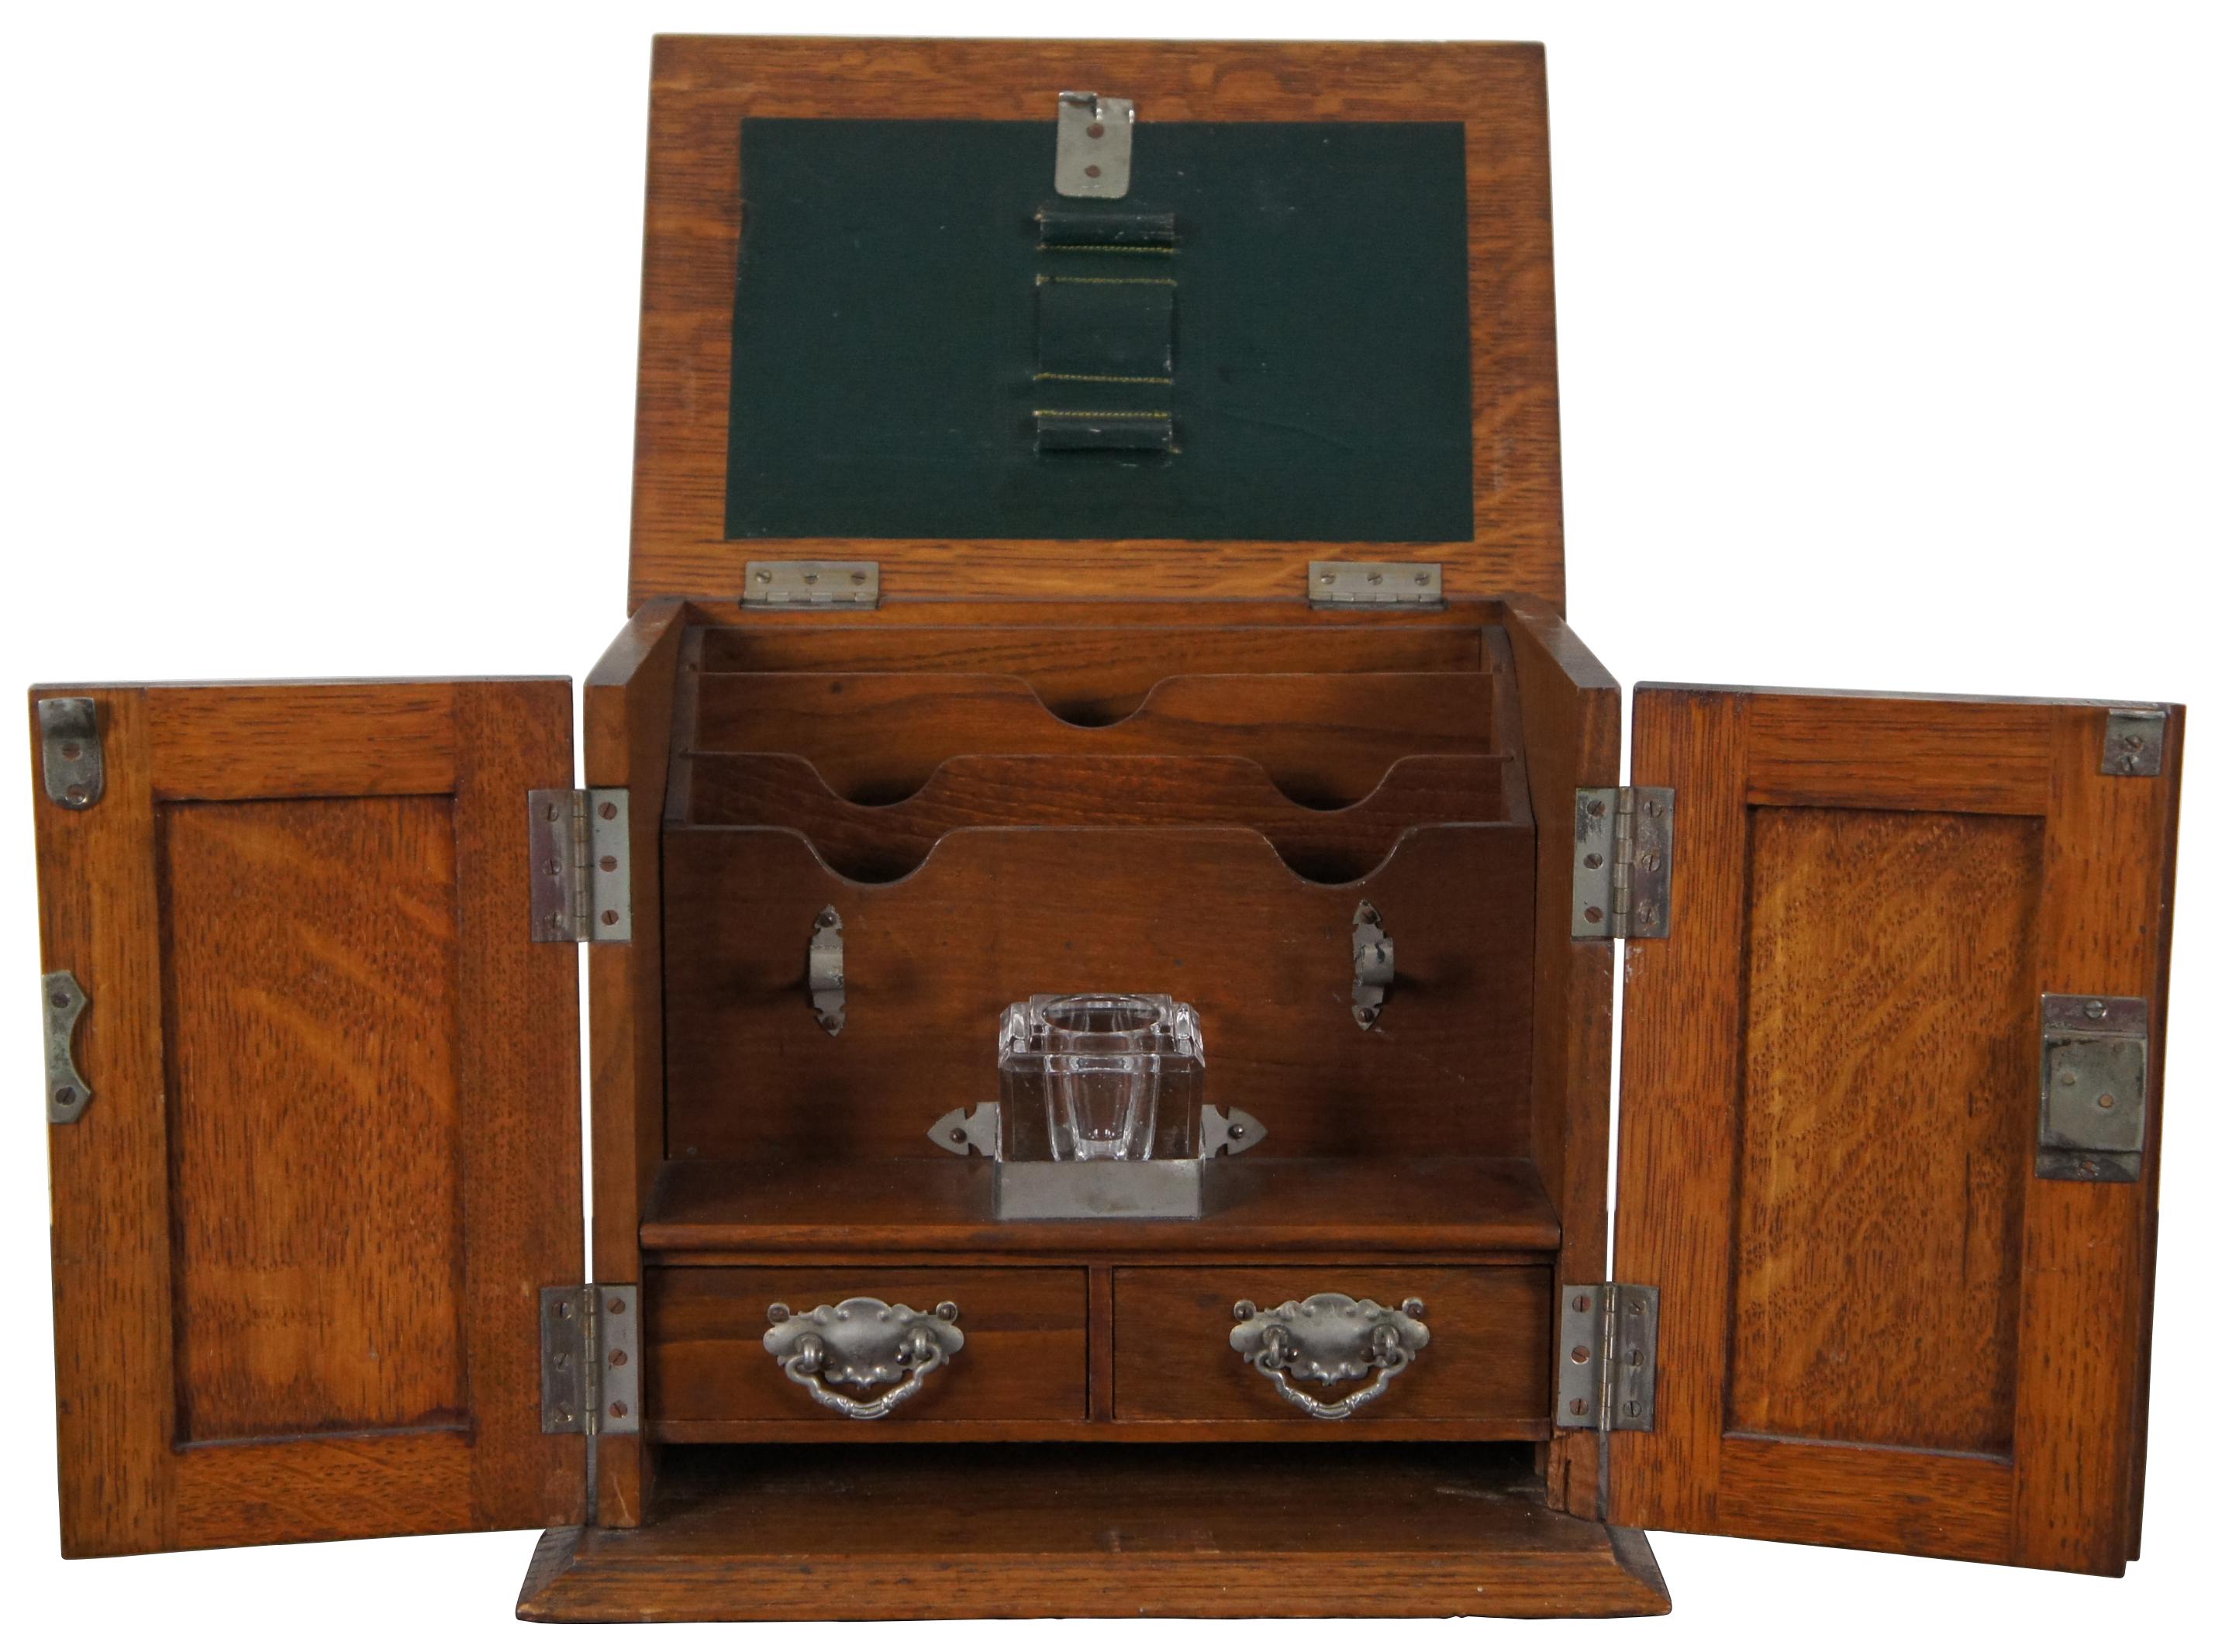 Antique quartersawn oak library desk top stationary cabinet with envelope slots, two small drawers, several pen rests/slots and glass ink well.